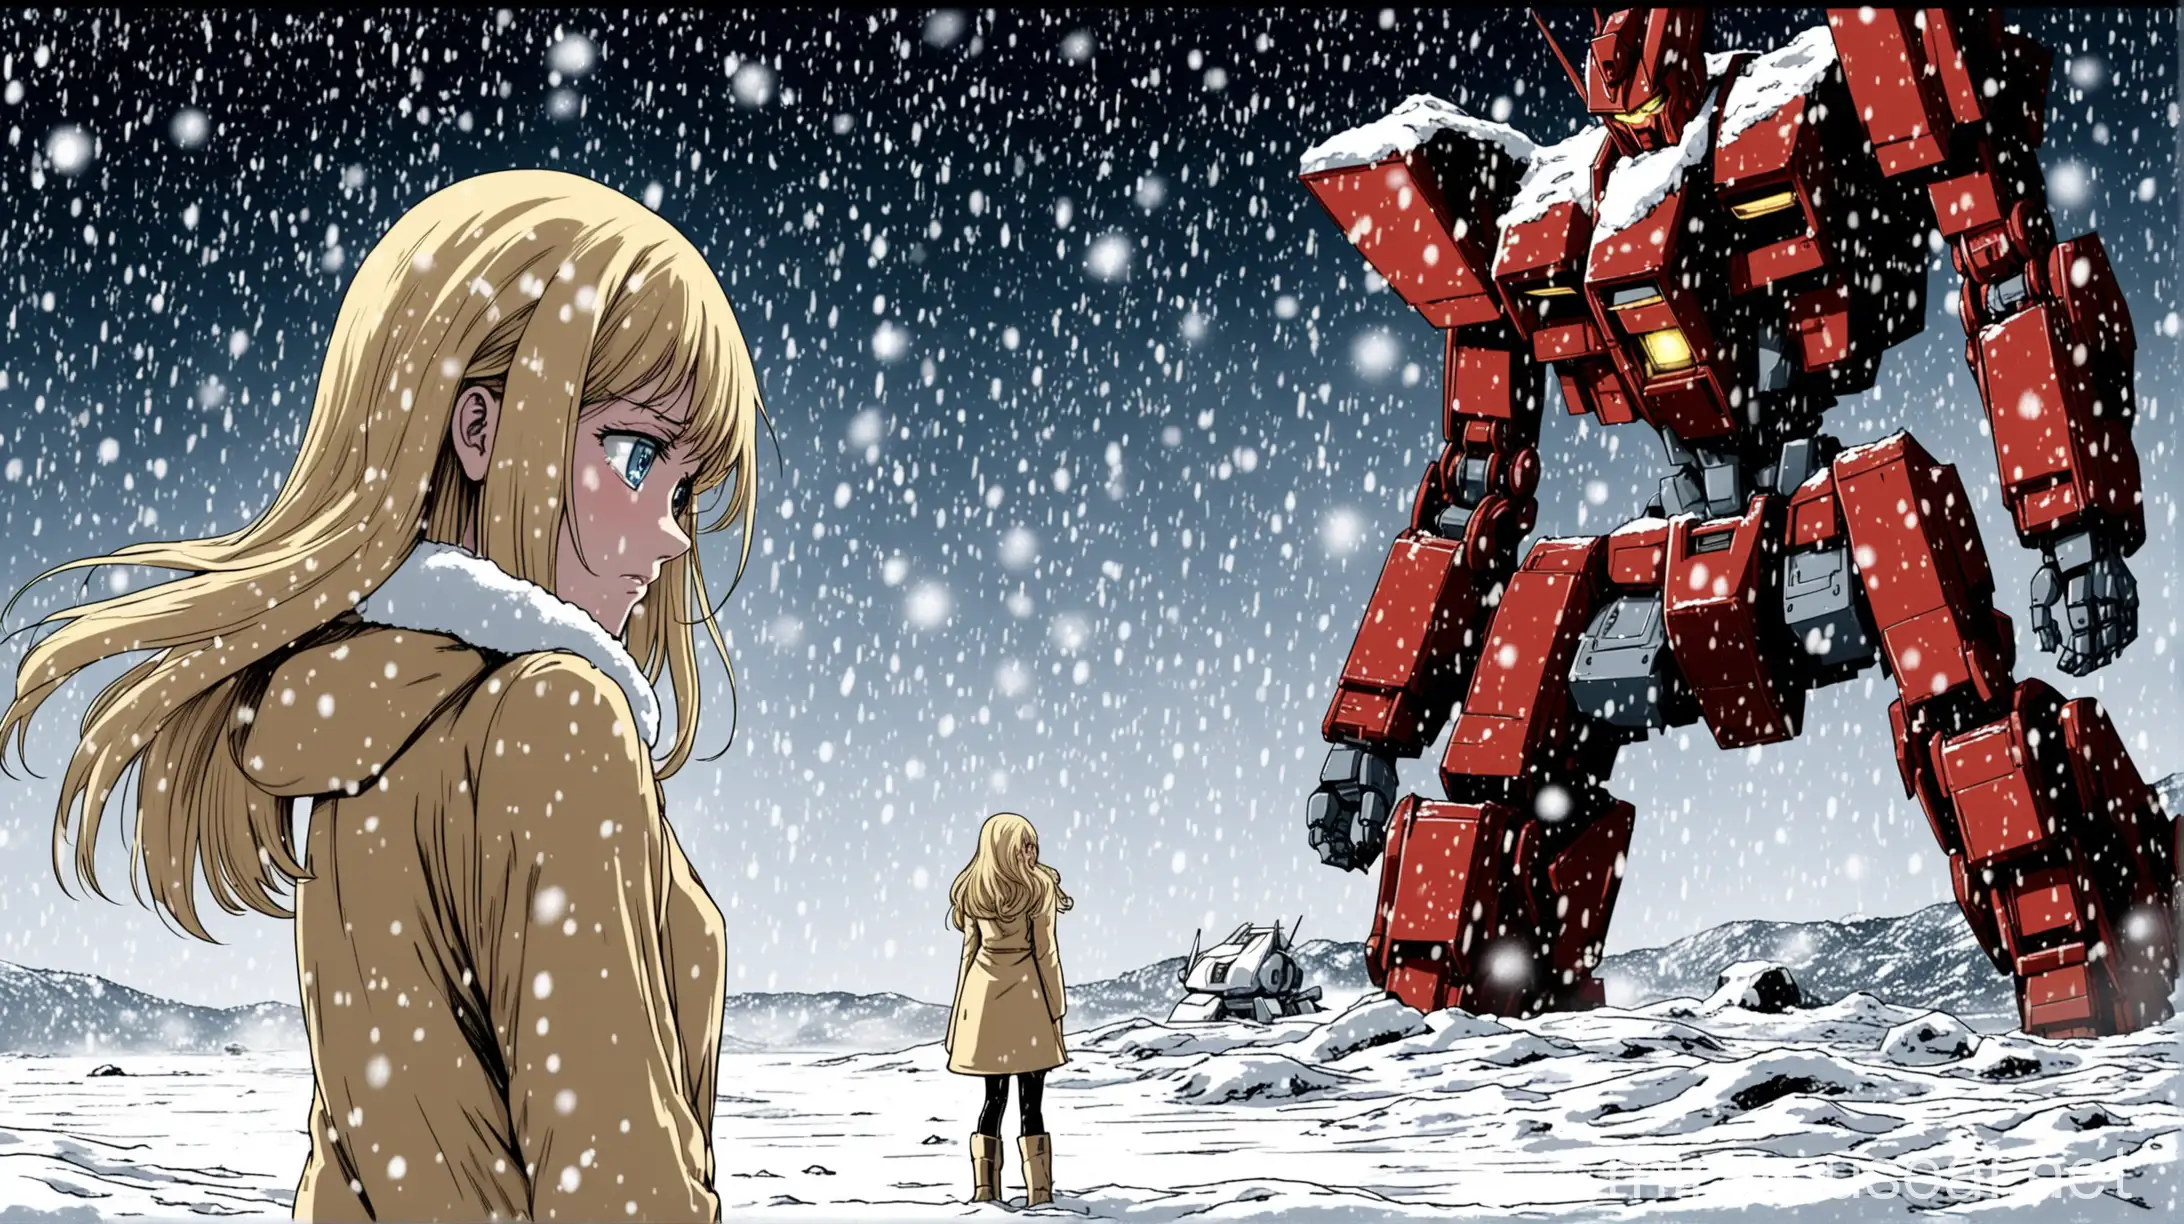 manga frames of a gorgeous blonde woman standing in the snowfall, her eyes is glowing red, and then giant robot appears off the snow, sad, crying 